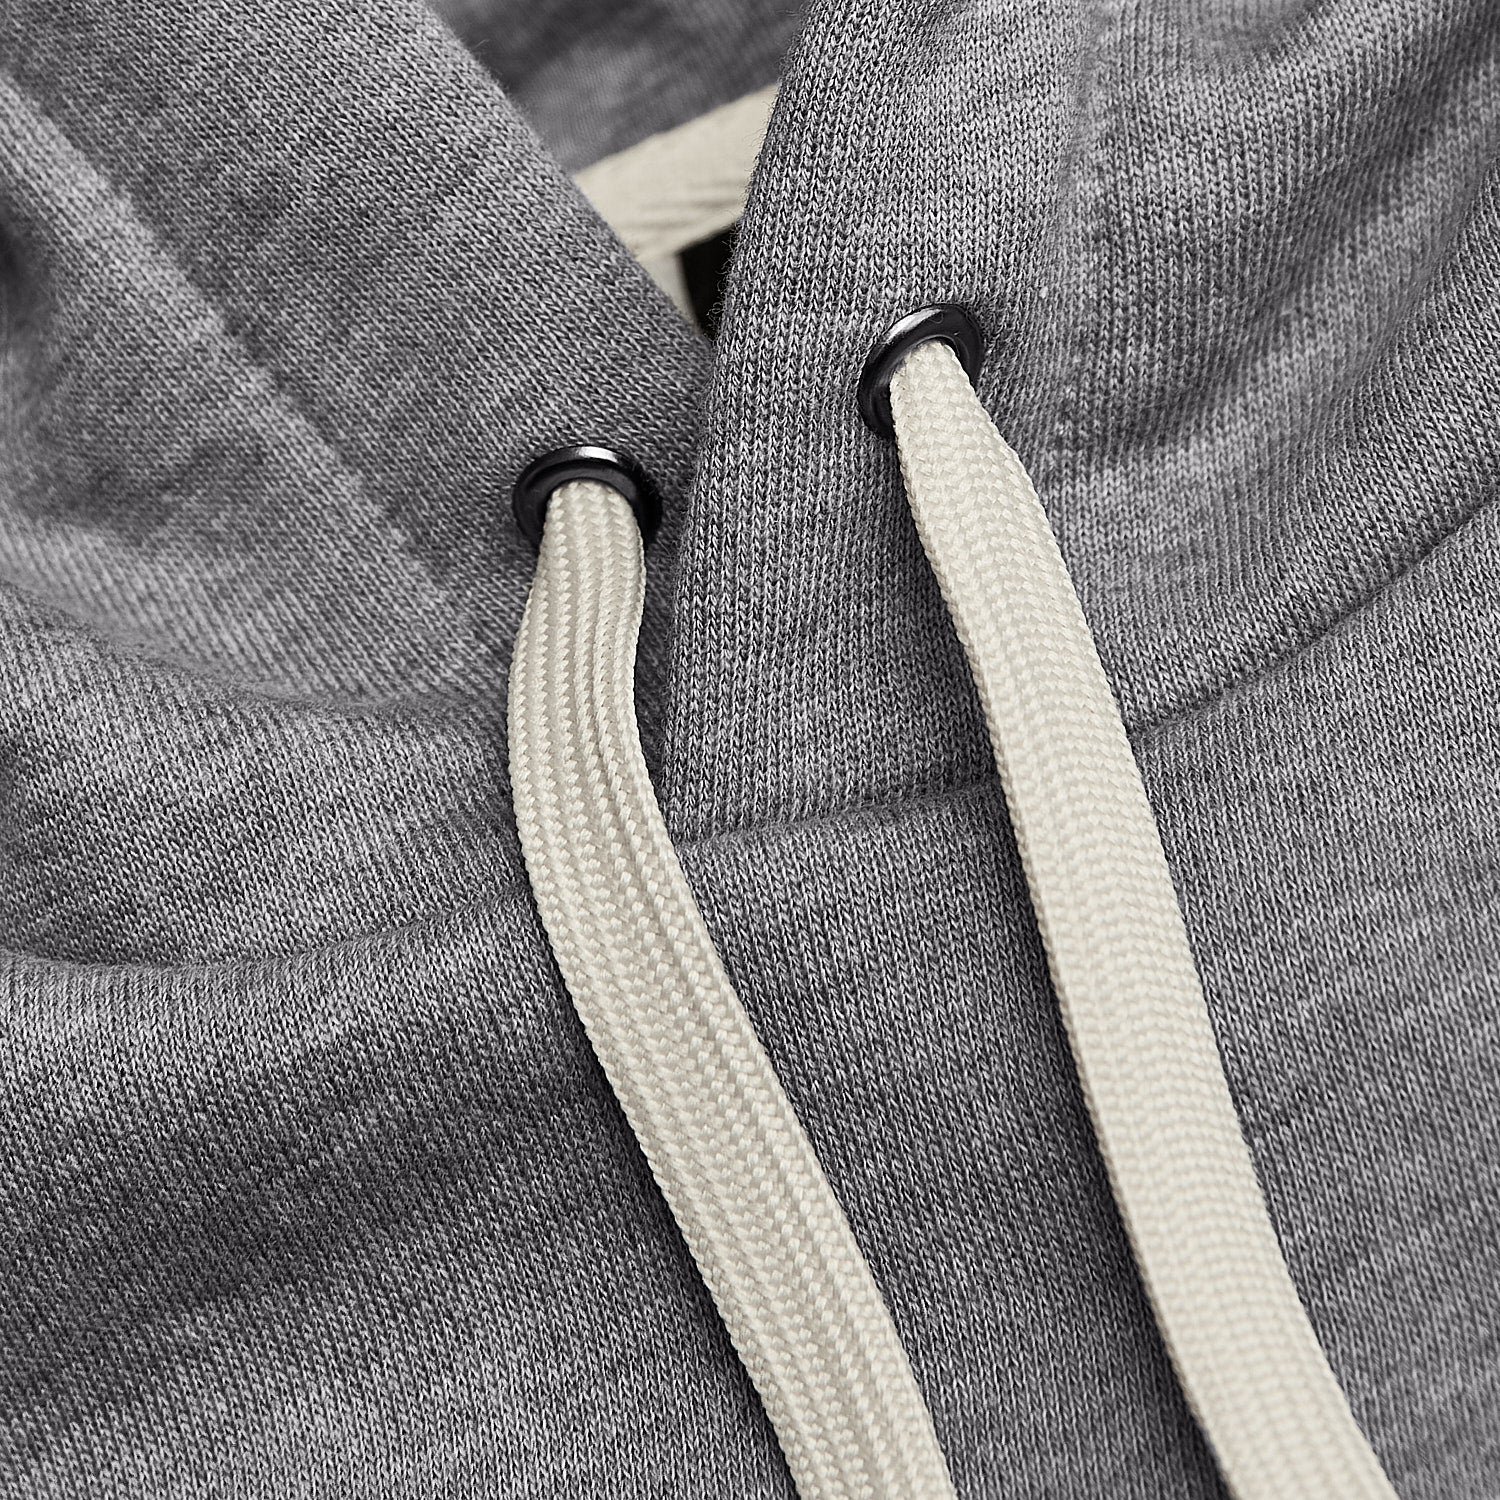 Heather Gray Fleece French Terry Pullover Hoodie